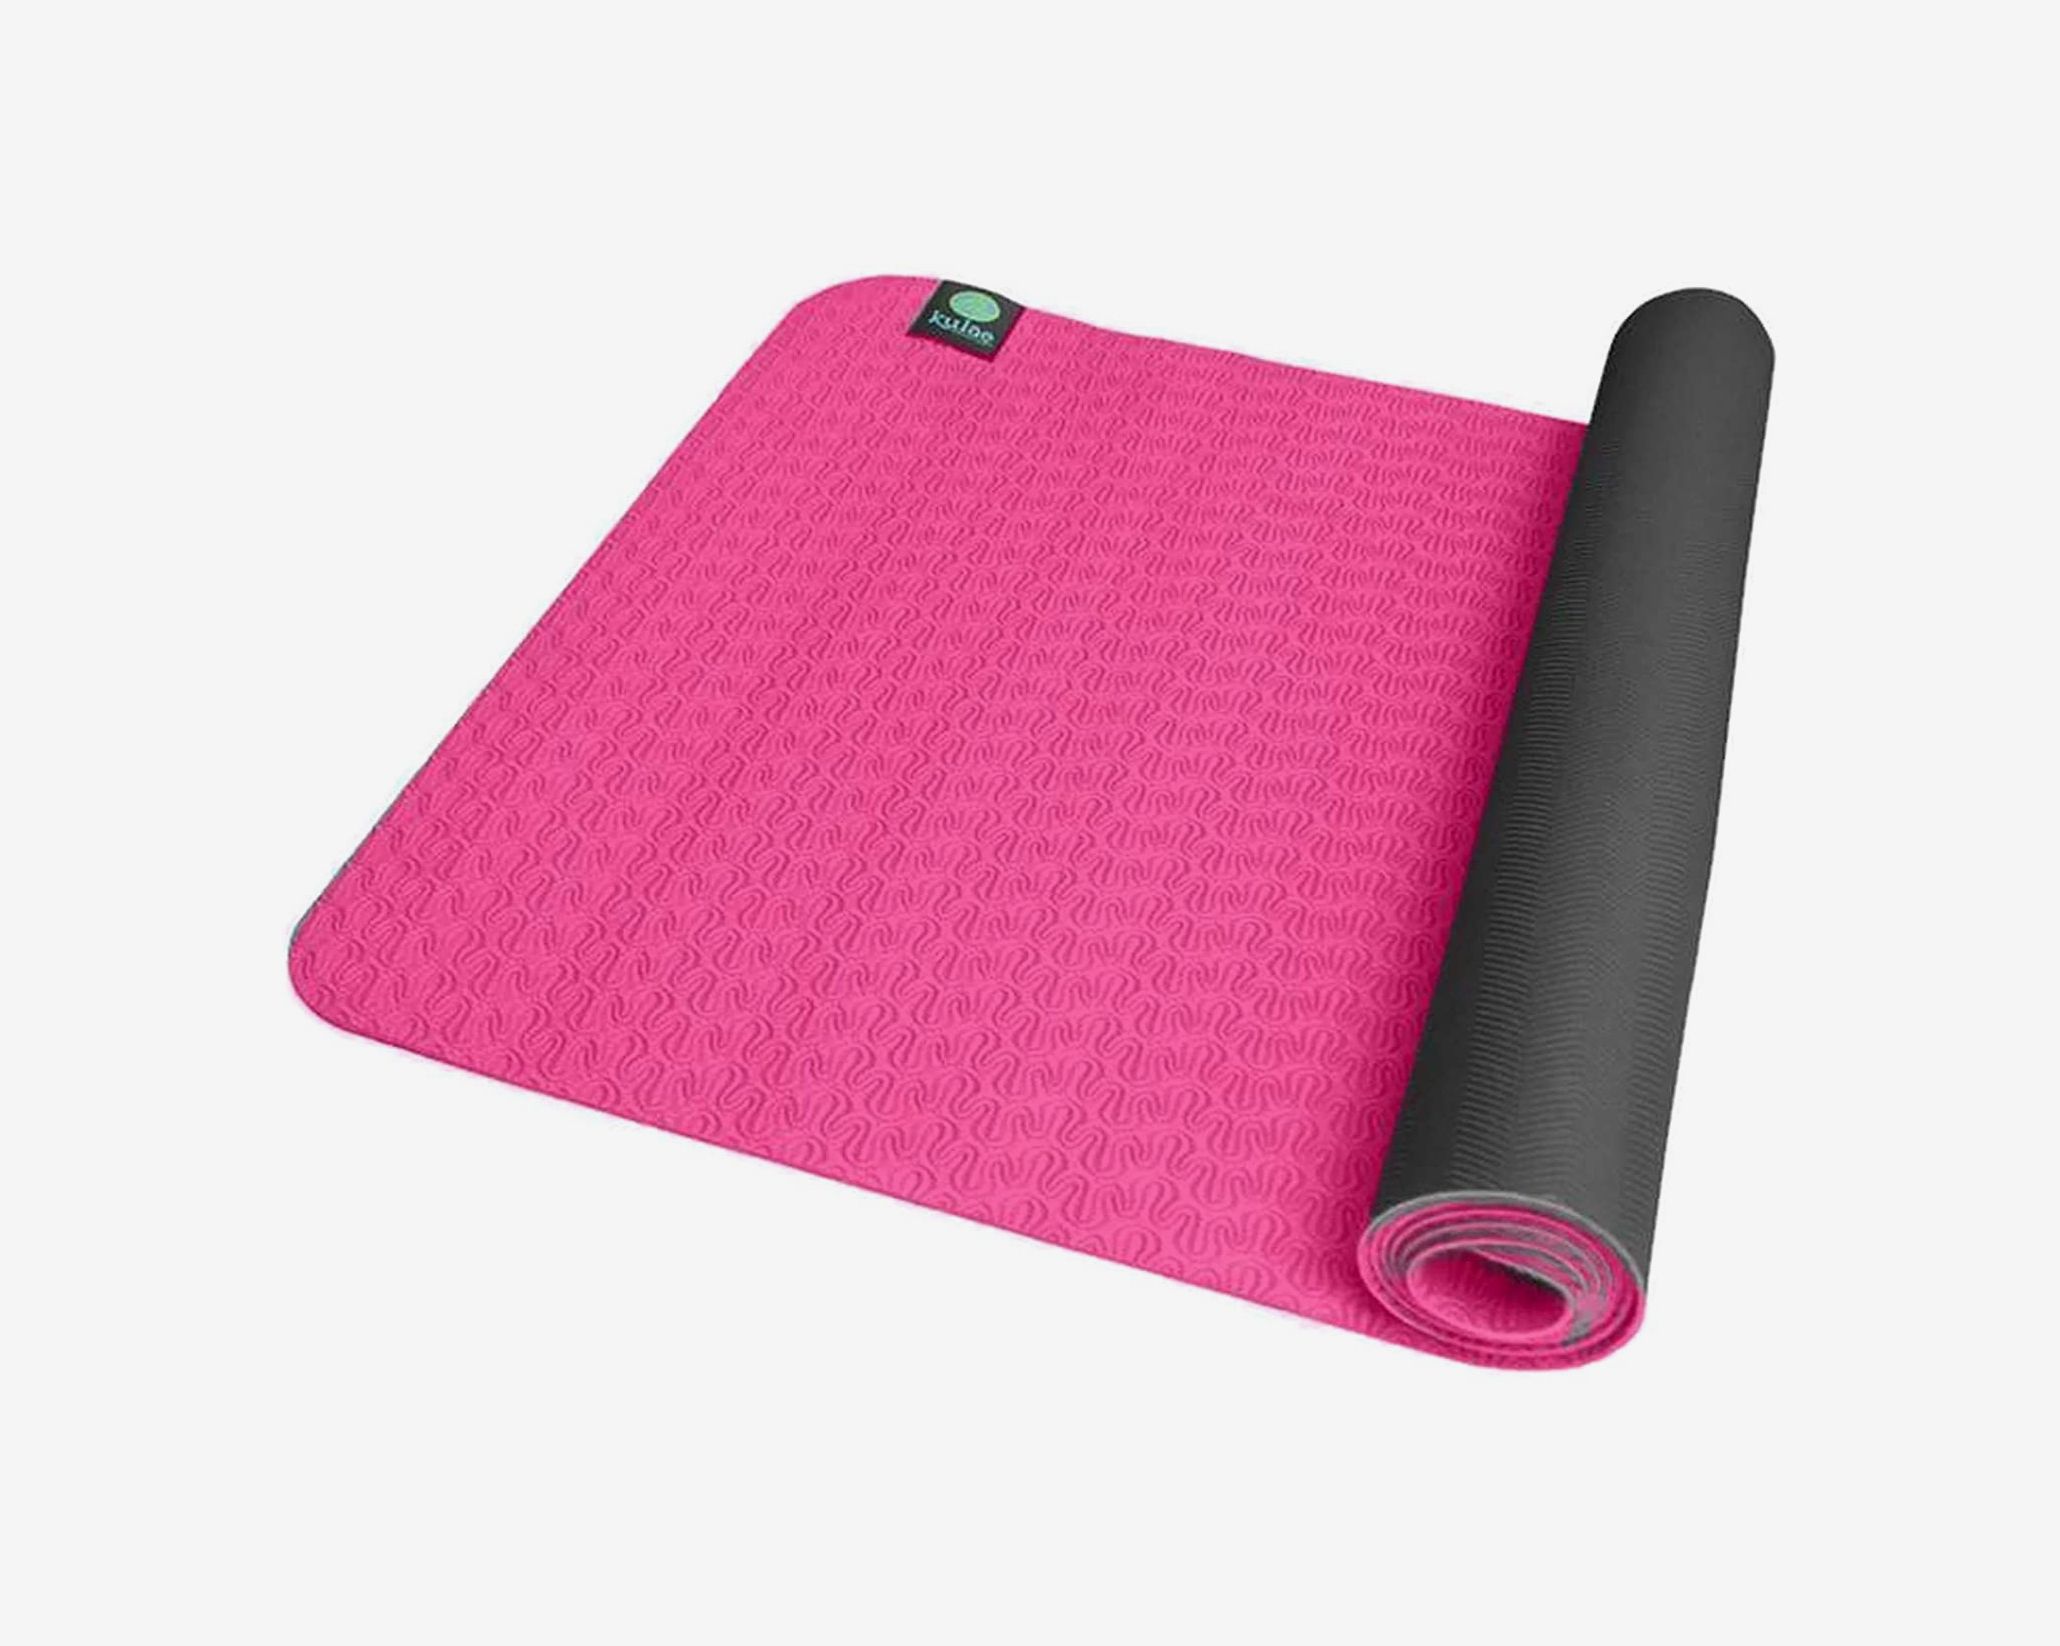 The Three Best Yoga Mats to Buy, According to Yogis